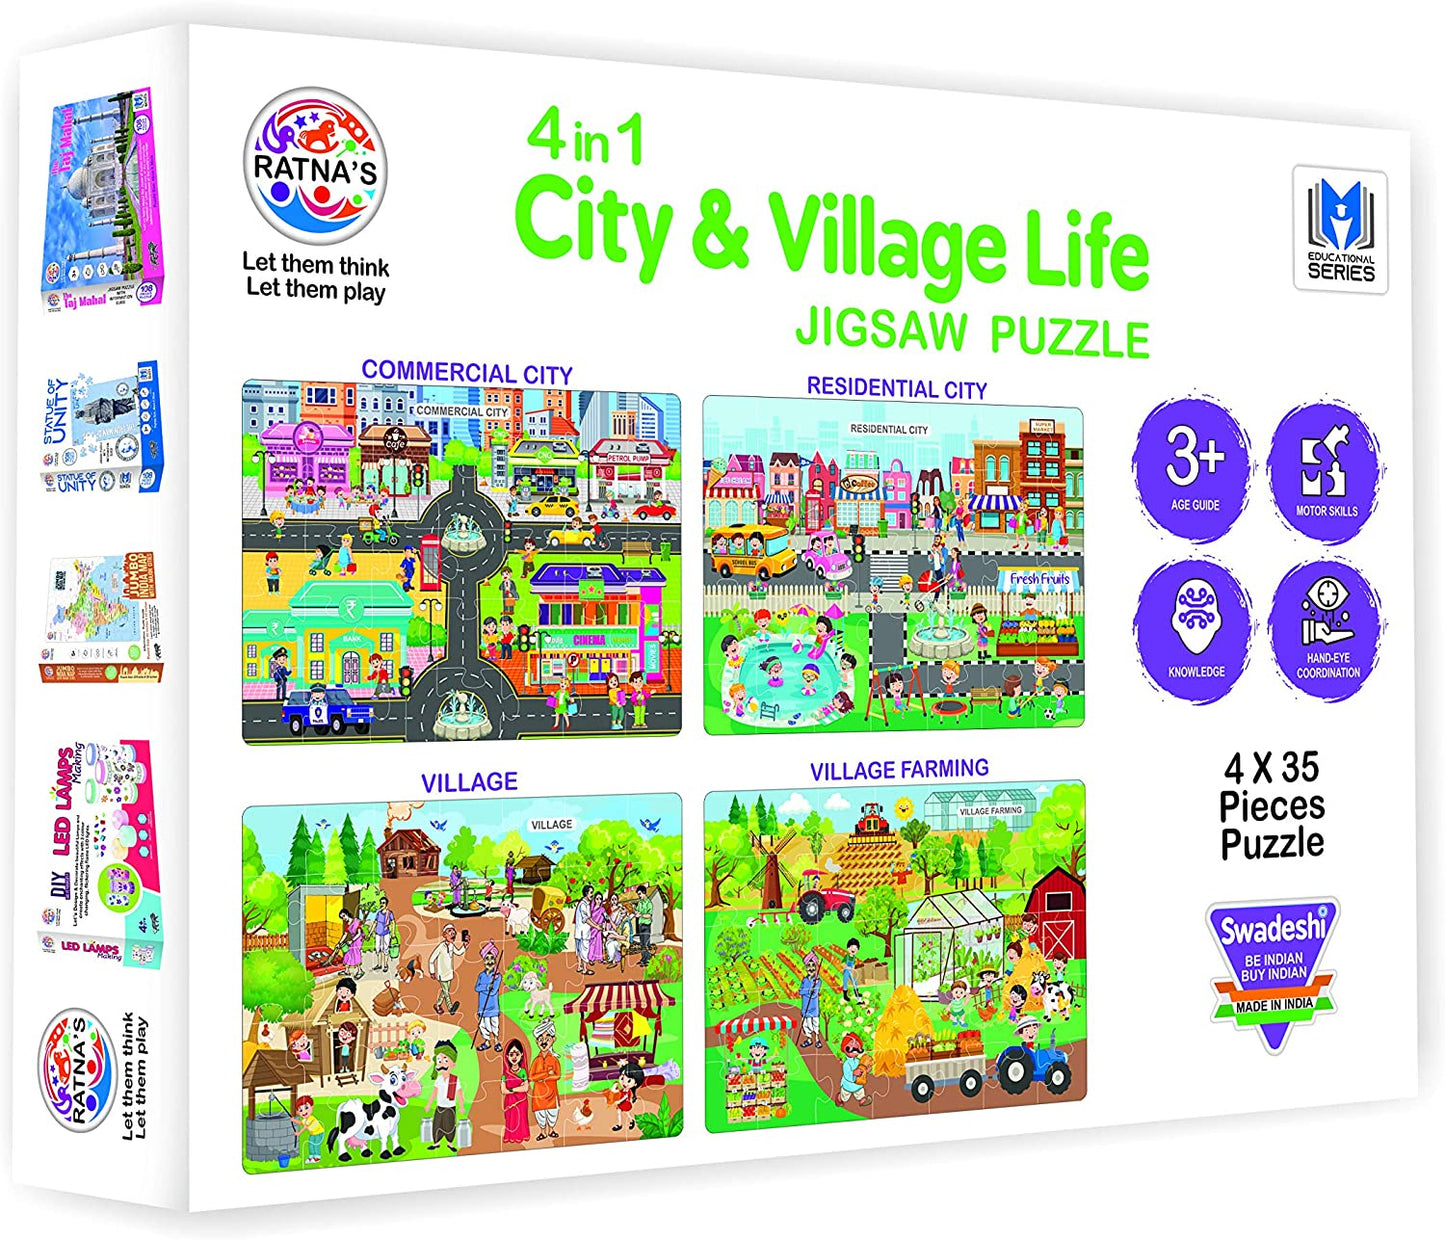 Ratna 4in1 City & Village Life Jigsaw Puzzle (4 x 35 Pieces)